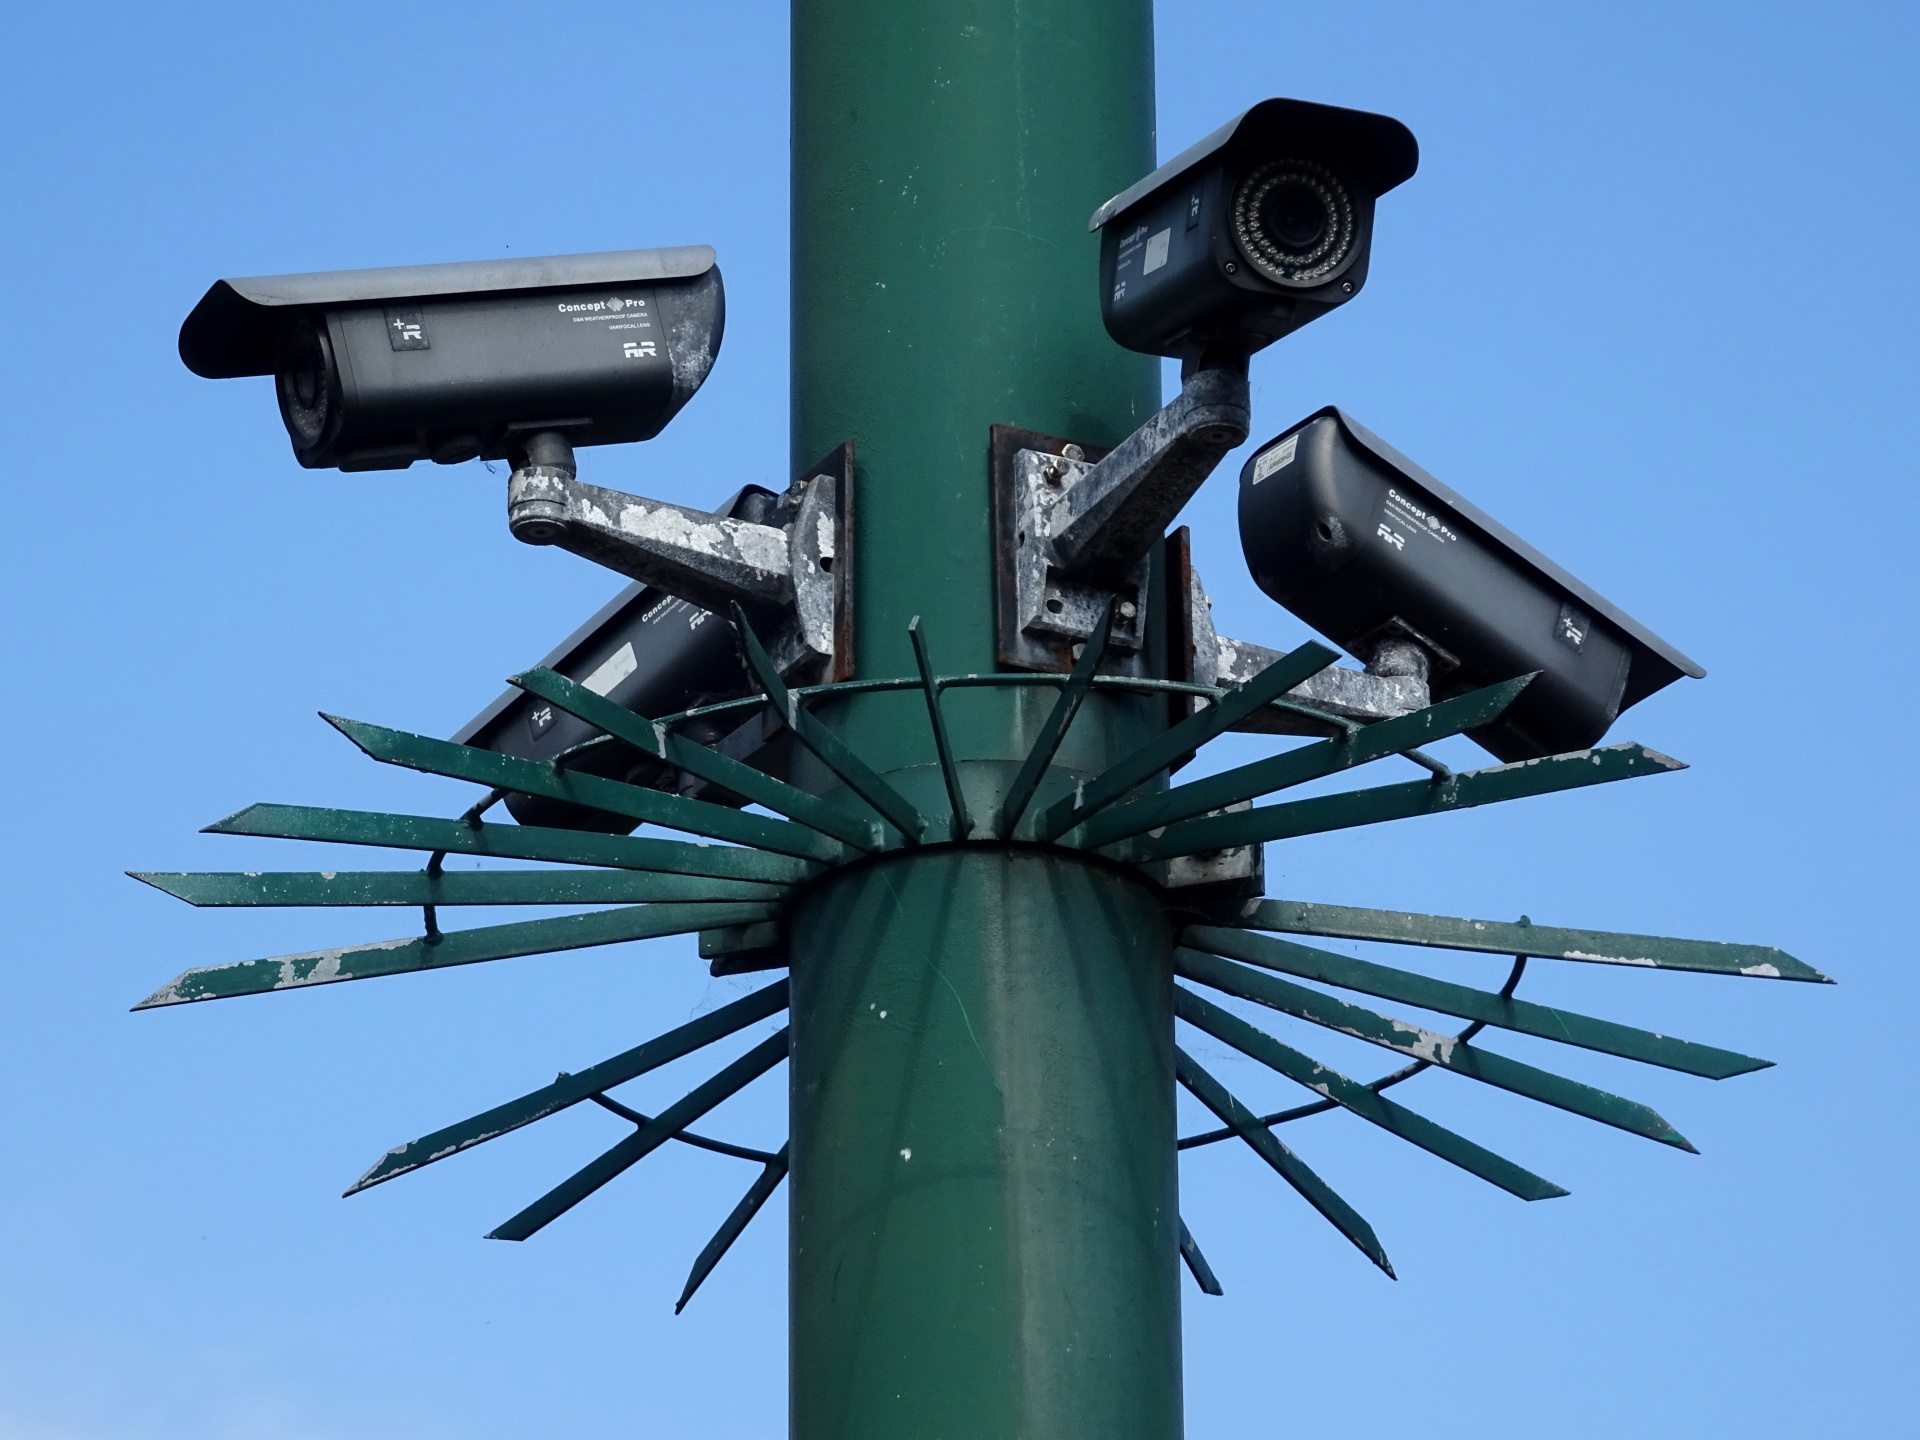 CCTV Cameras Guarded By Spikes